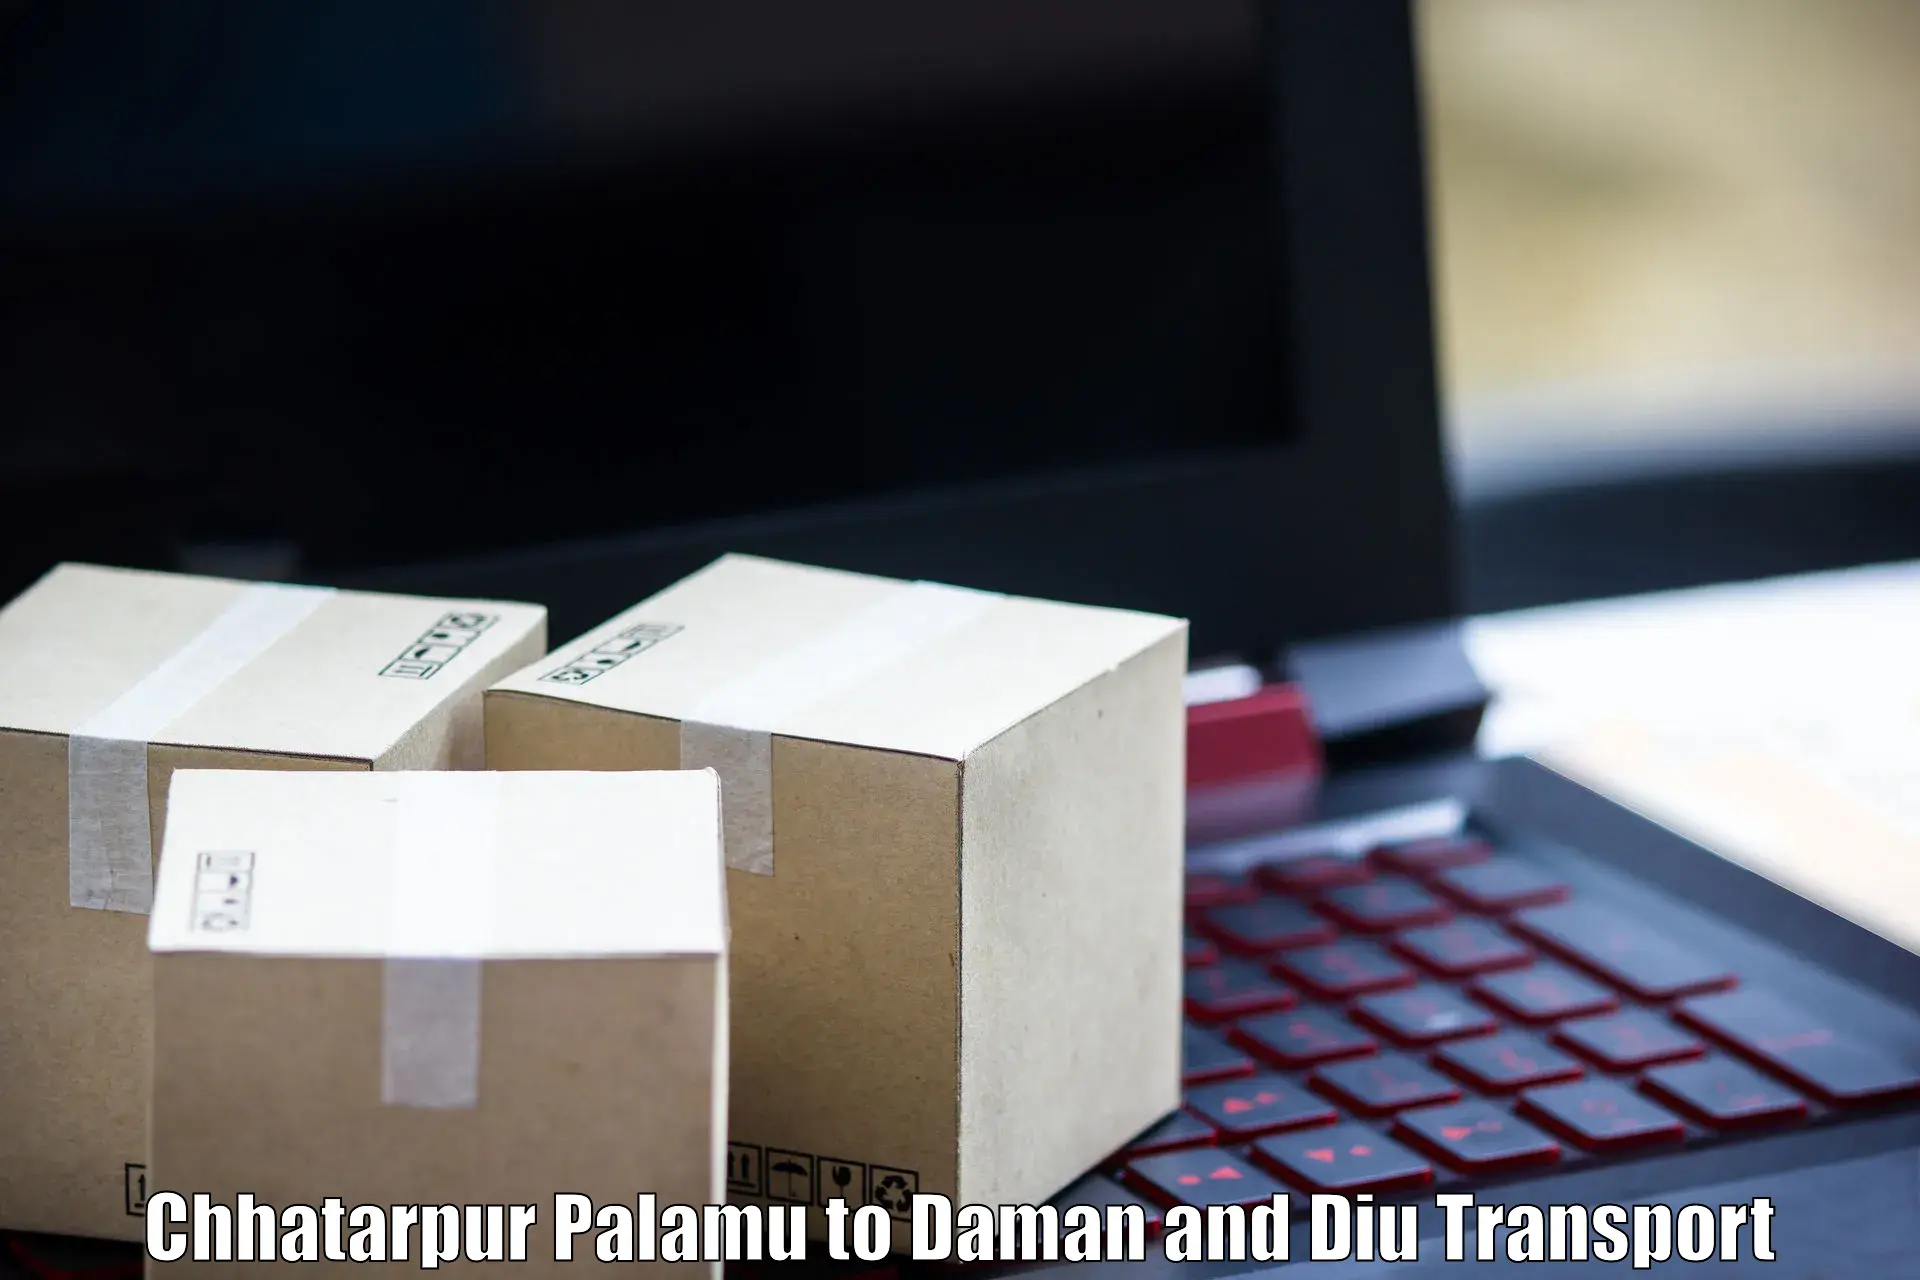 Package delivery services Chhatarpur Palamu to Daman